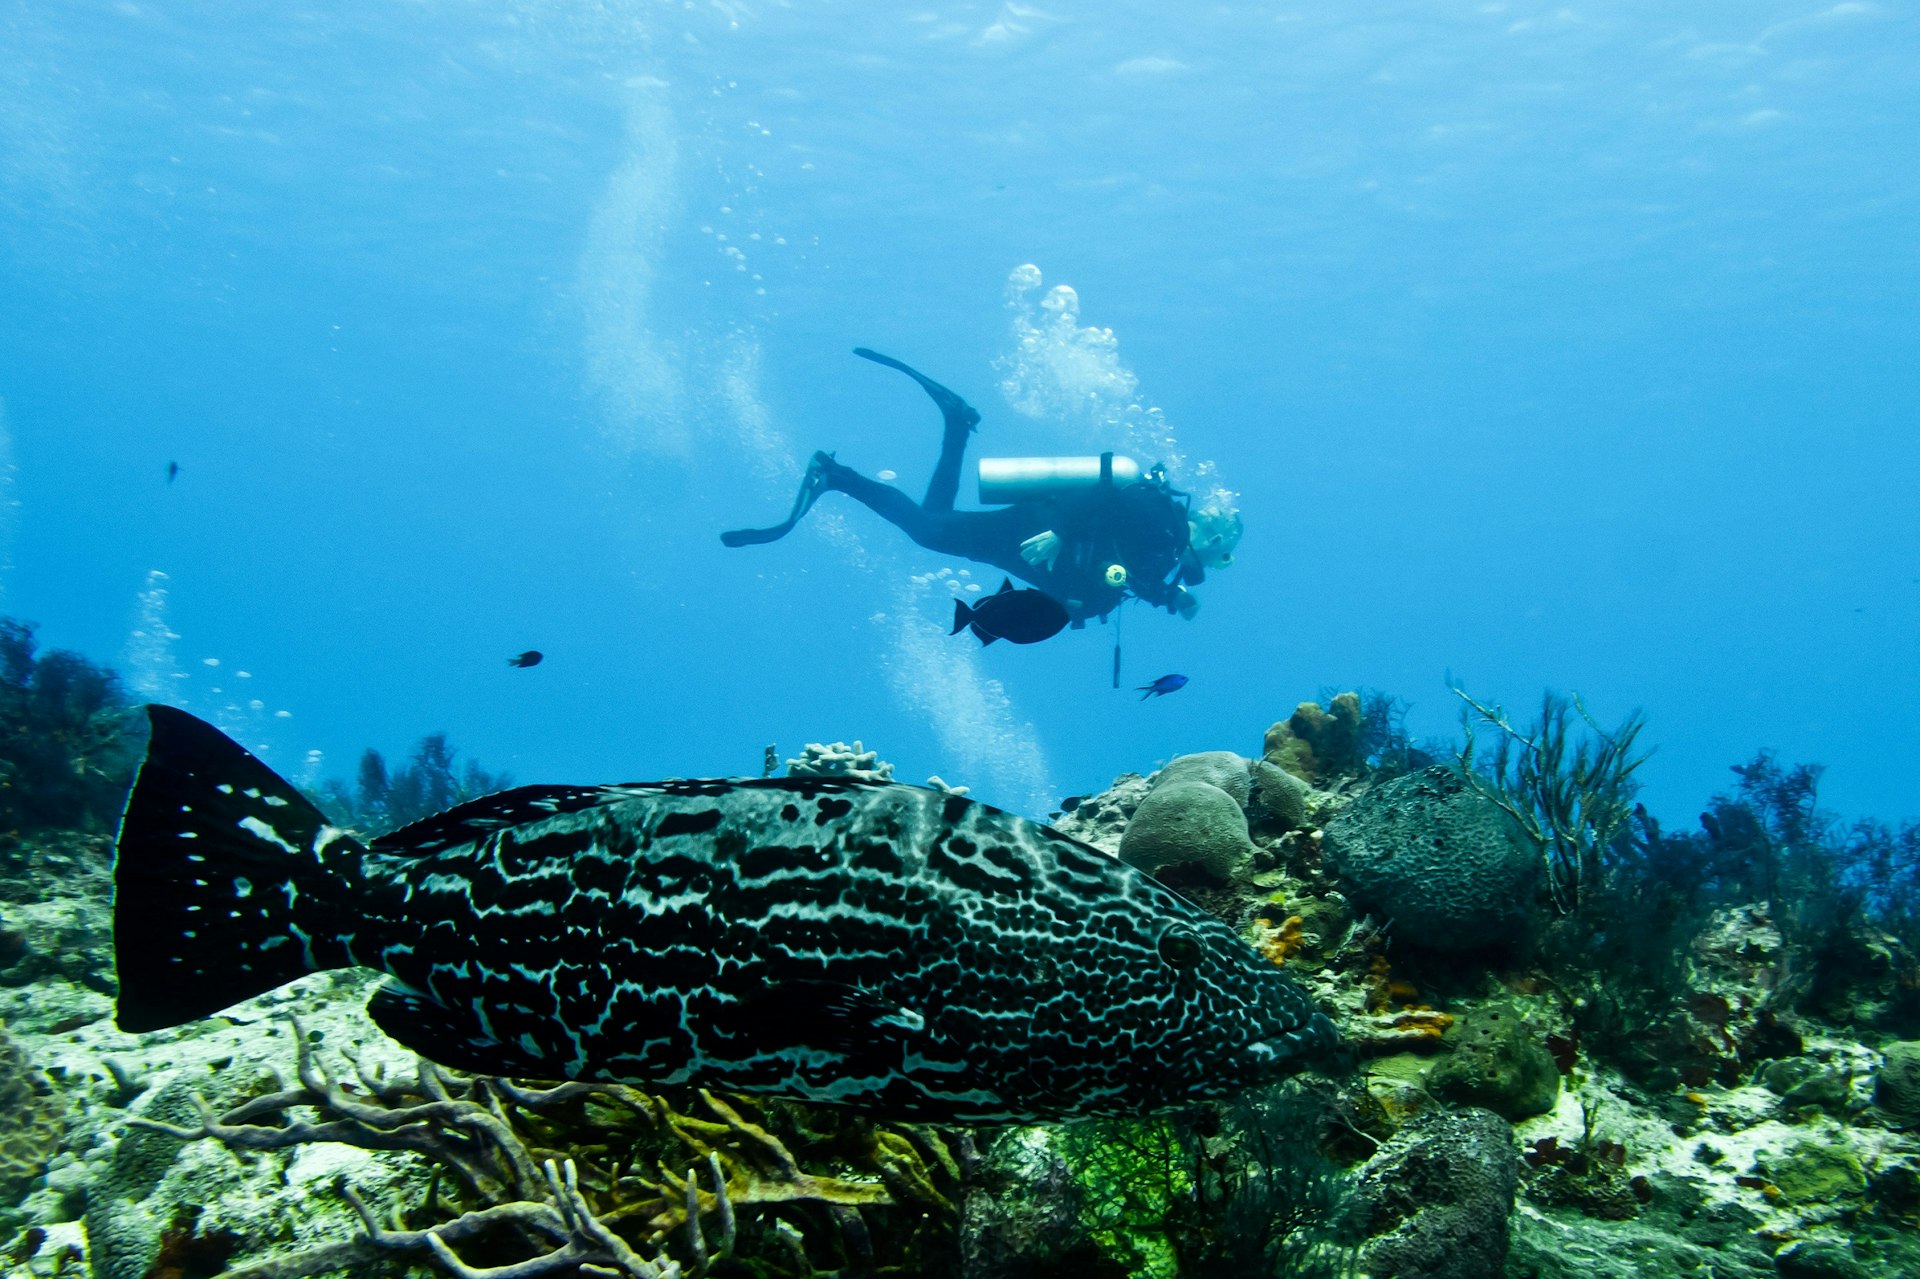 A large grouper fish swims low against the reef; a diver swims along horizontally in the background keeping their distance from the reef and fish